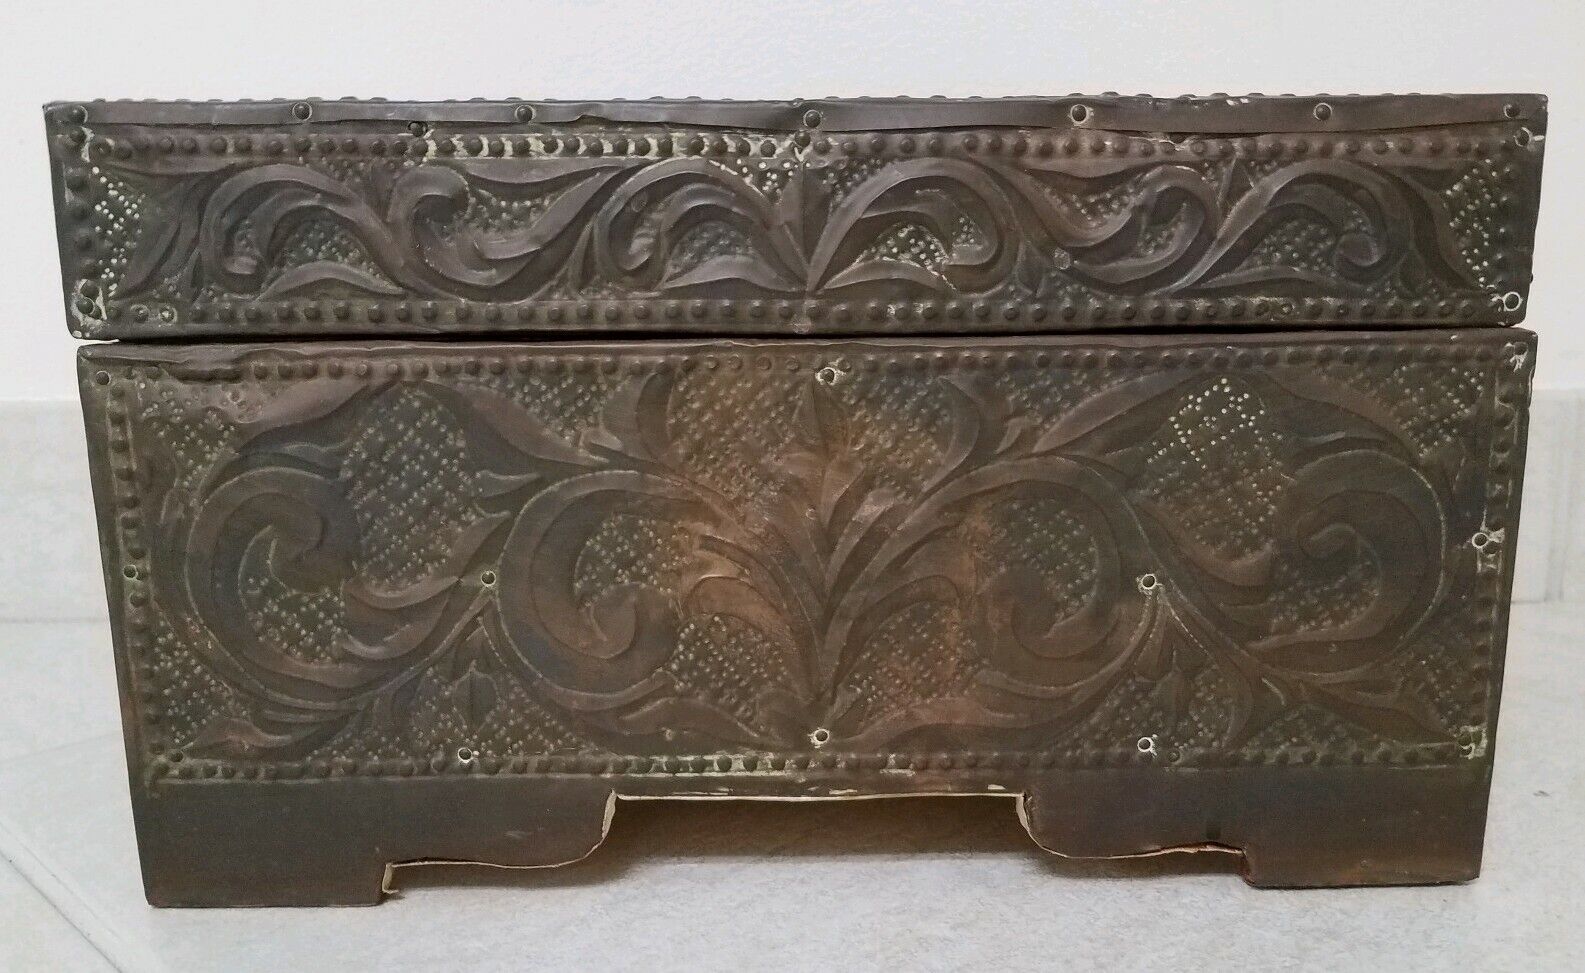 Antique rare copper jewelry box/Cask-handcrafted natural patina from age